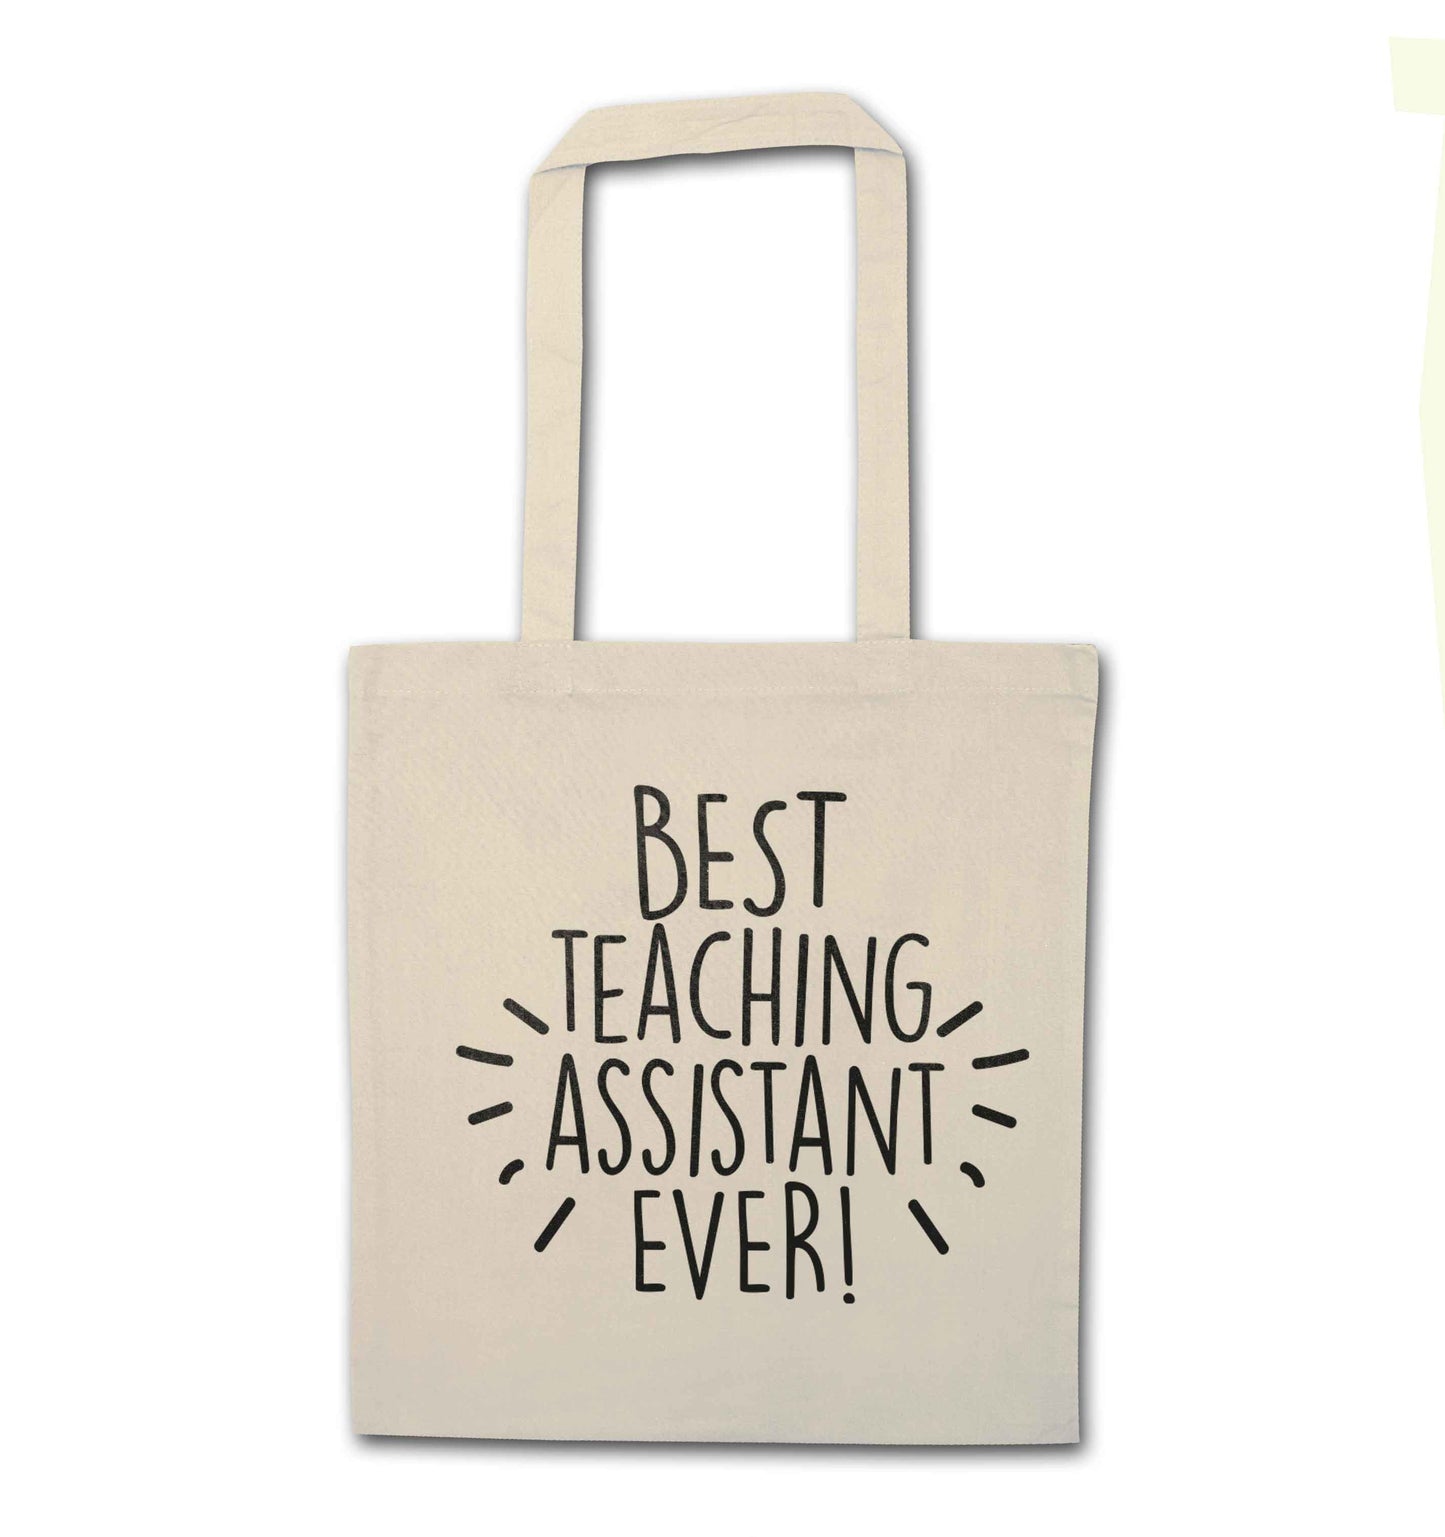 Best teaching assistant ever! natural tote bag